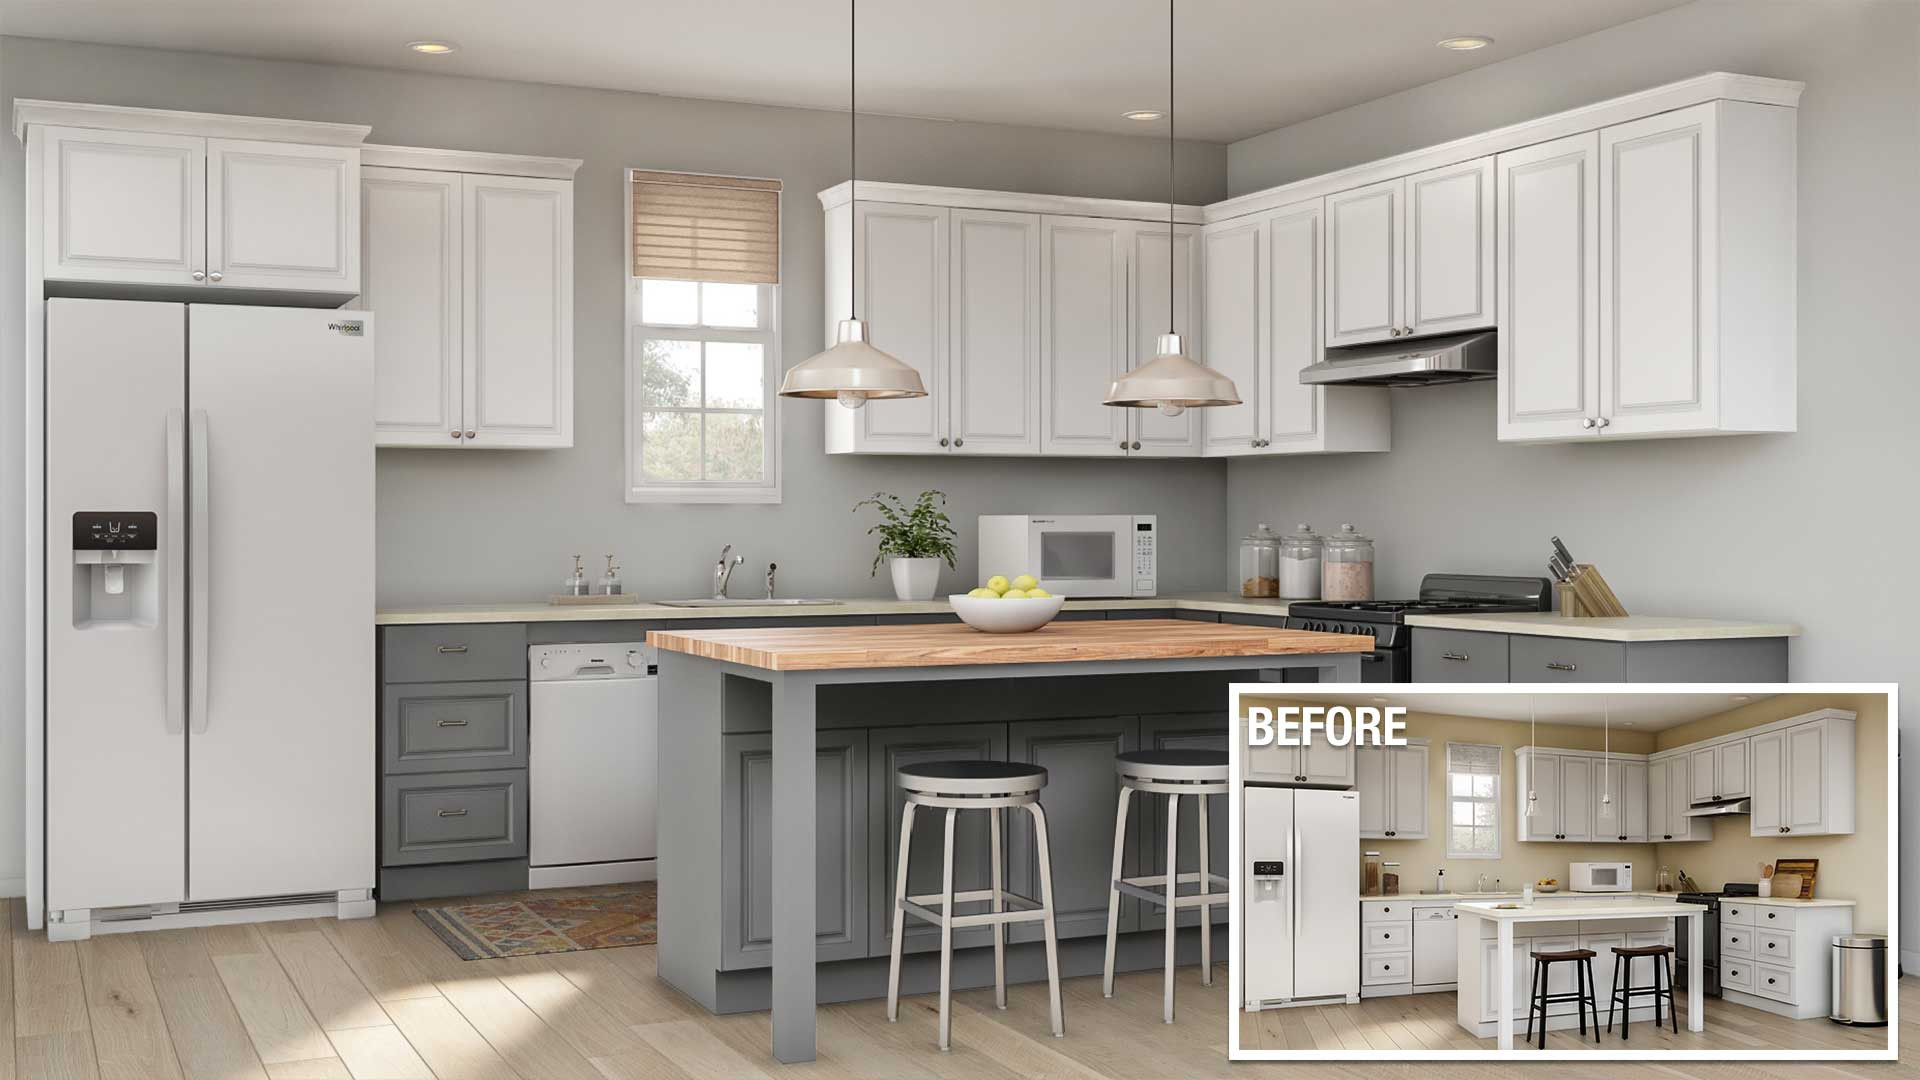 Remodel Kitchen Cost New Cost to Remodel A Kitchen the Home Depot